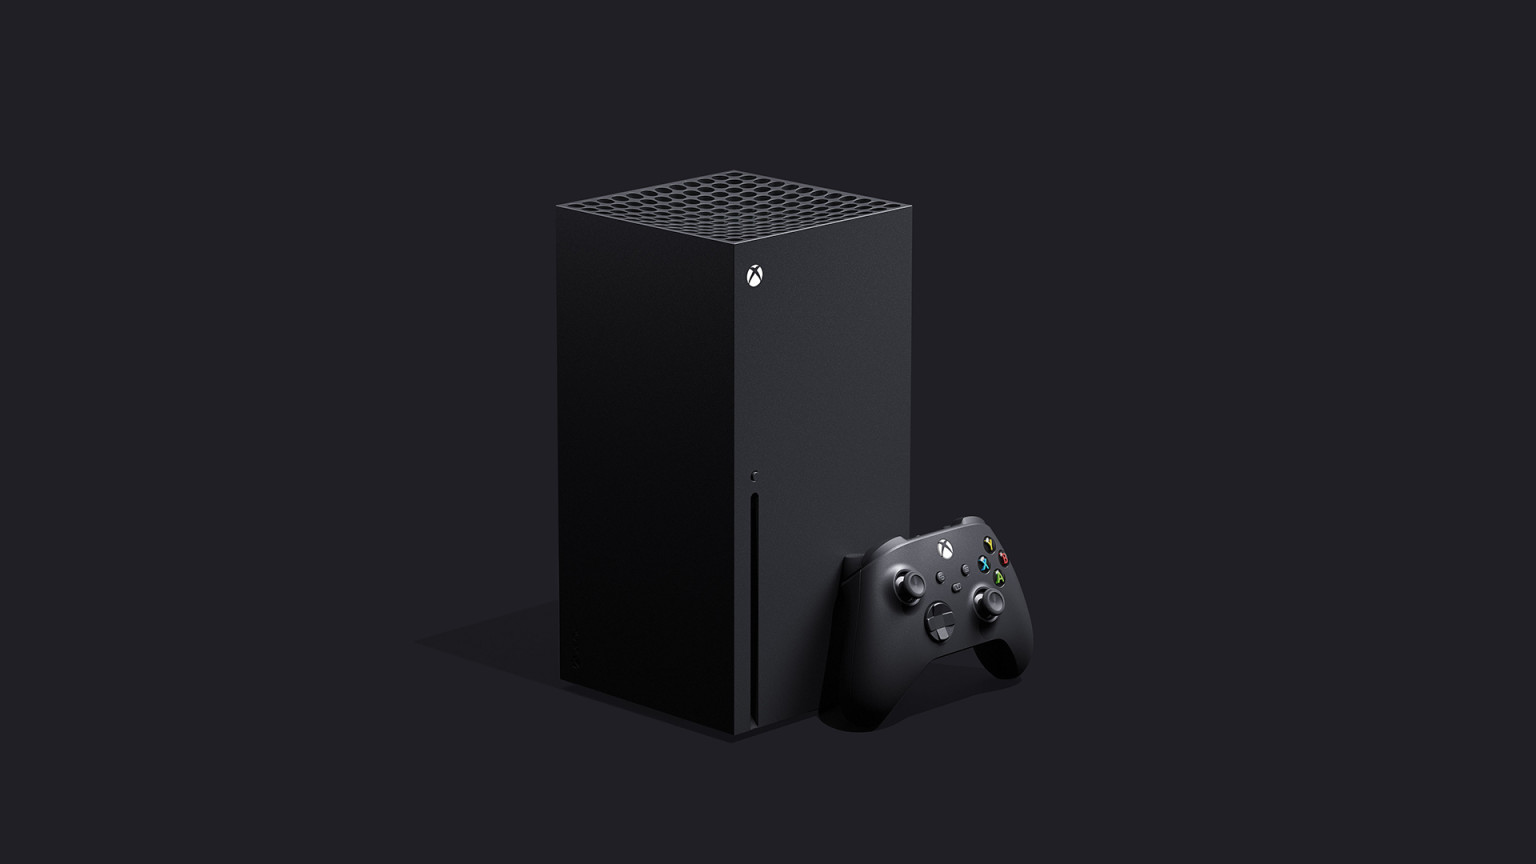 Video For “Power Your Dreams” – Xbox Series X sera disponible fin 2020